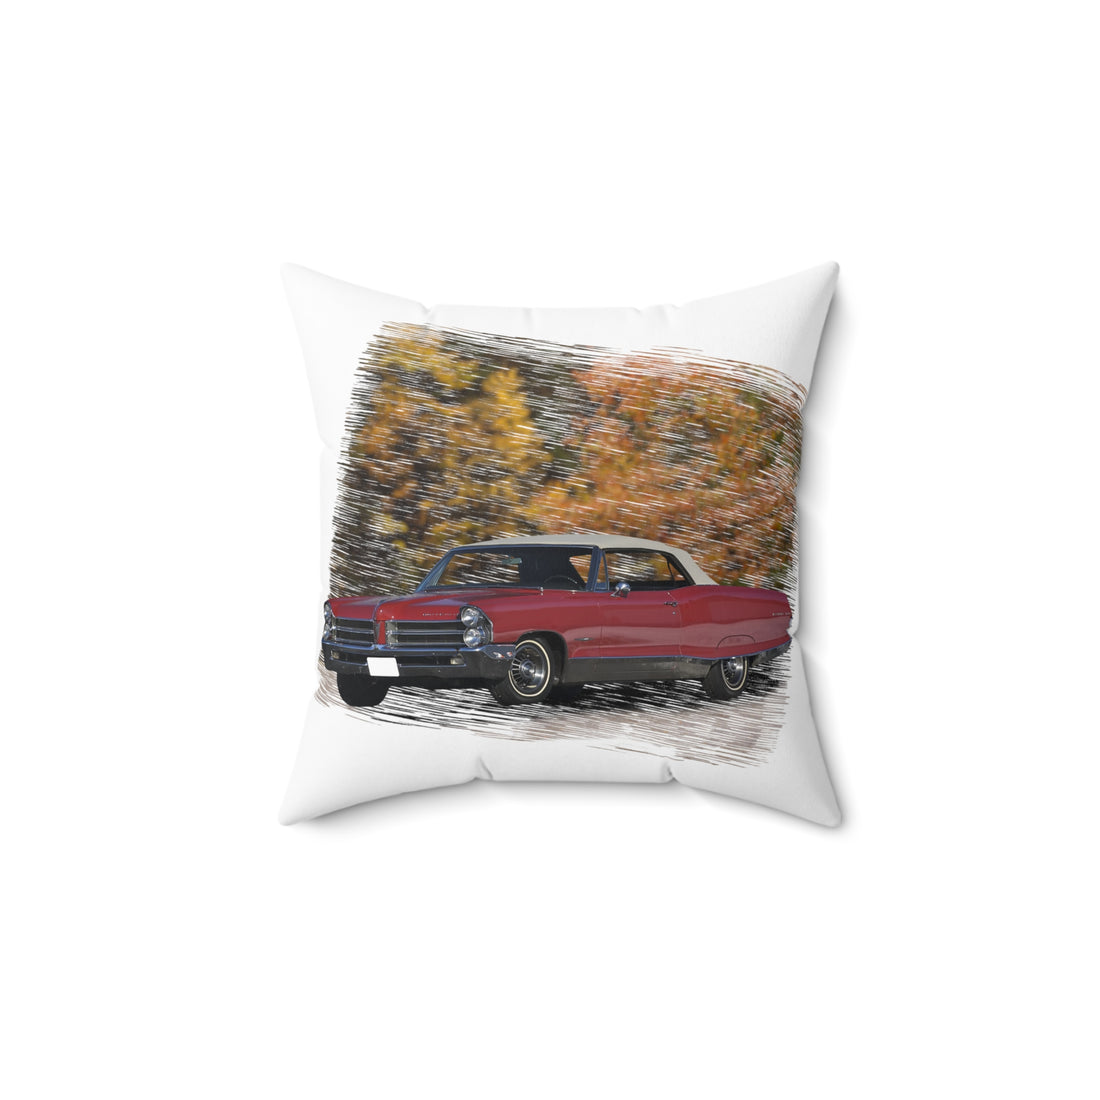 1965 Bonneville in our fall day series Spun Polyester Square Pillow